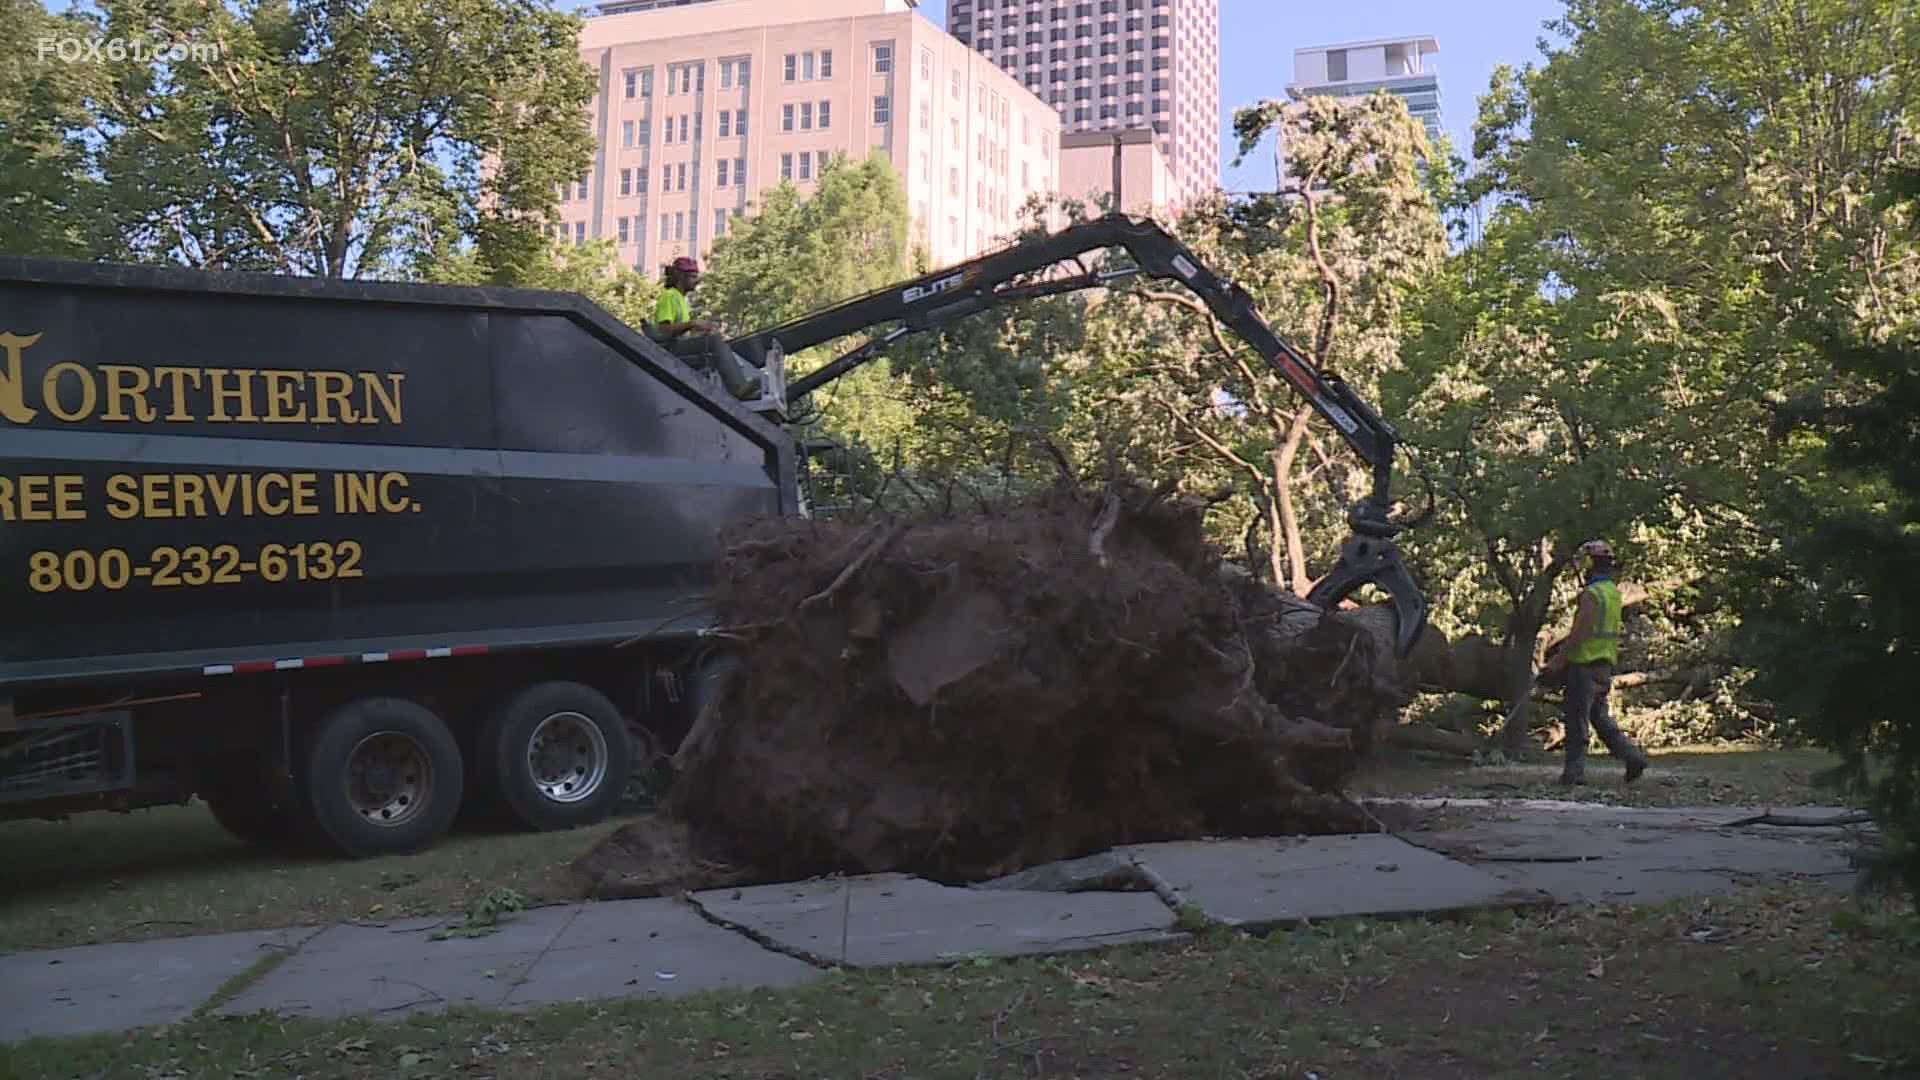 Hartford officials say they are working with Eversource to restore power to residents, while crews also remove fallen trees from Bushnell Park.